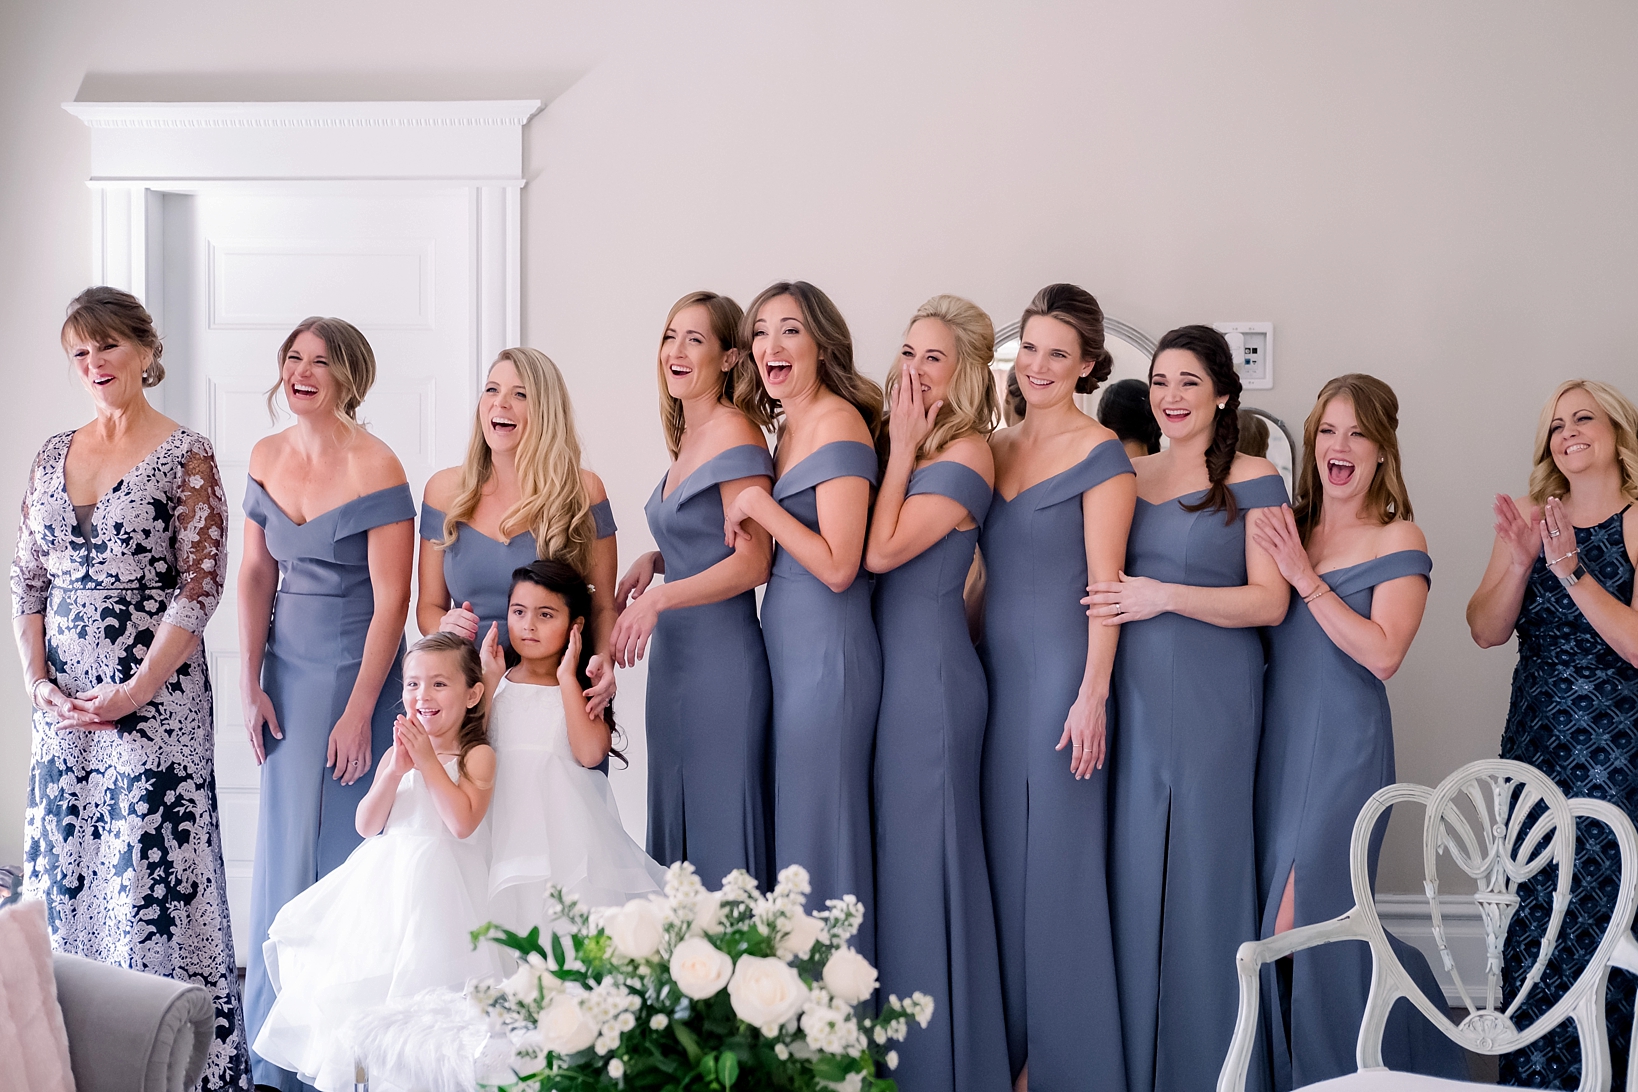 The bridesmaids seeing the bride in her dress for the first time by Sarah & Ben Photography